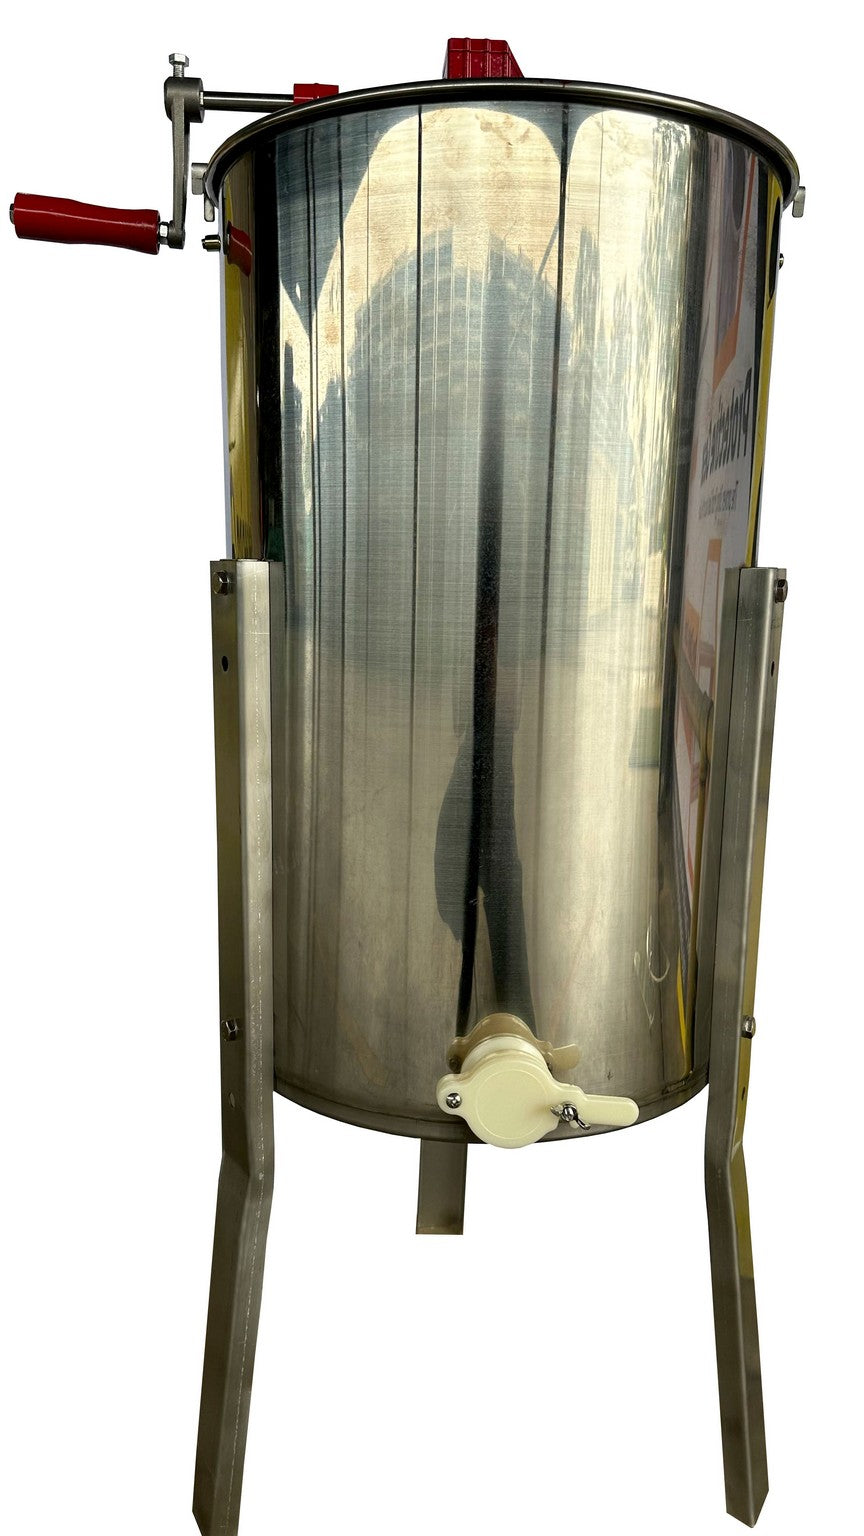 Effortlessly extract honey with our 3-frame manual honey extractor, complete with a convenient honey gate.